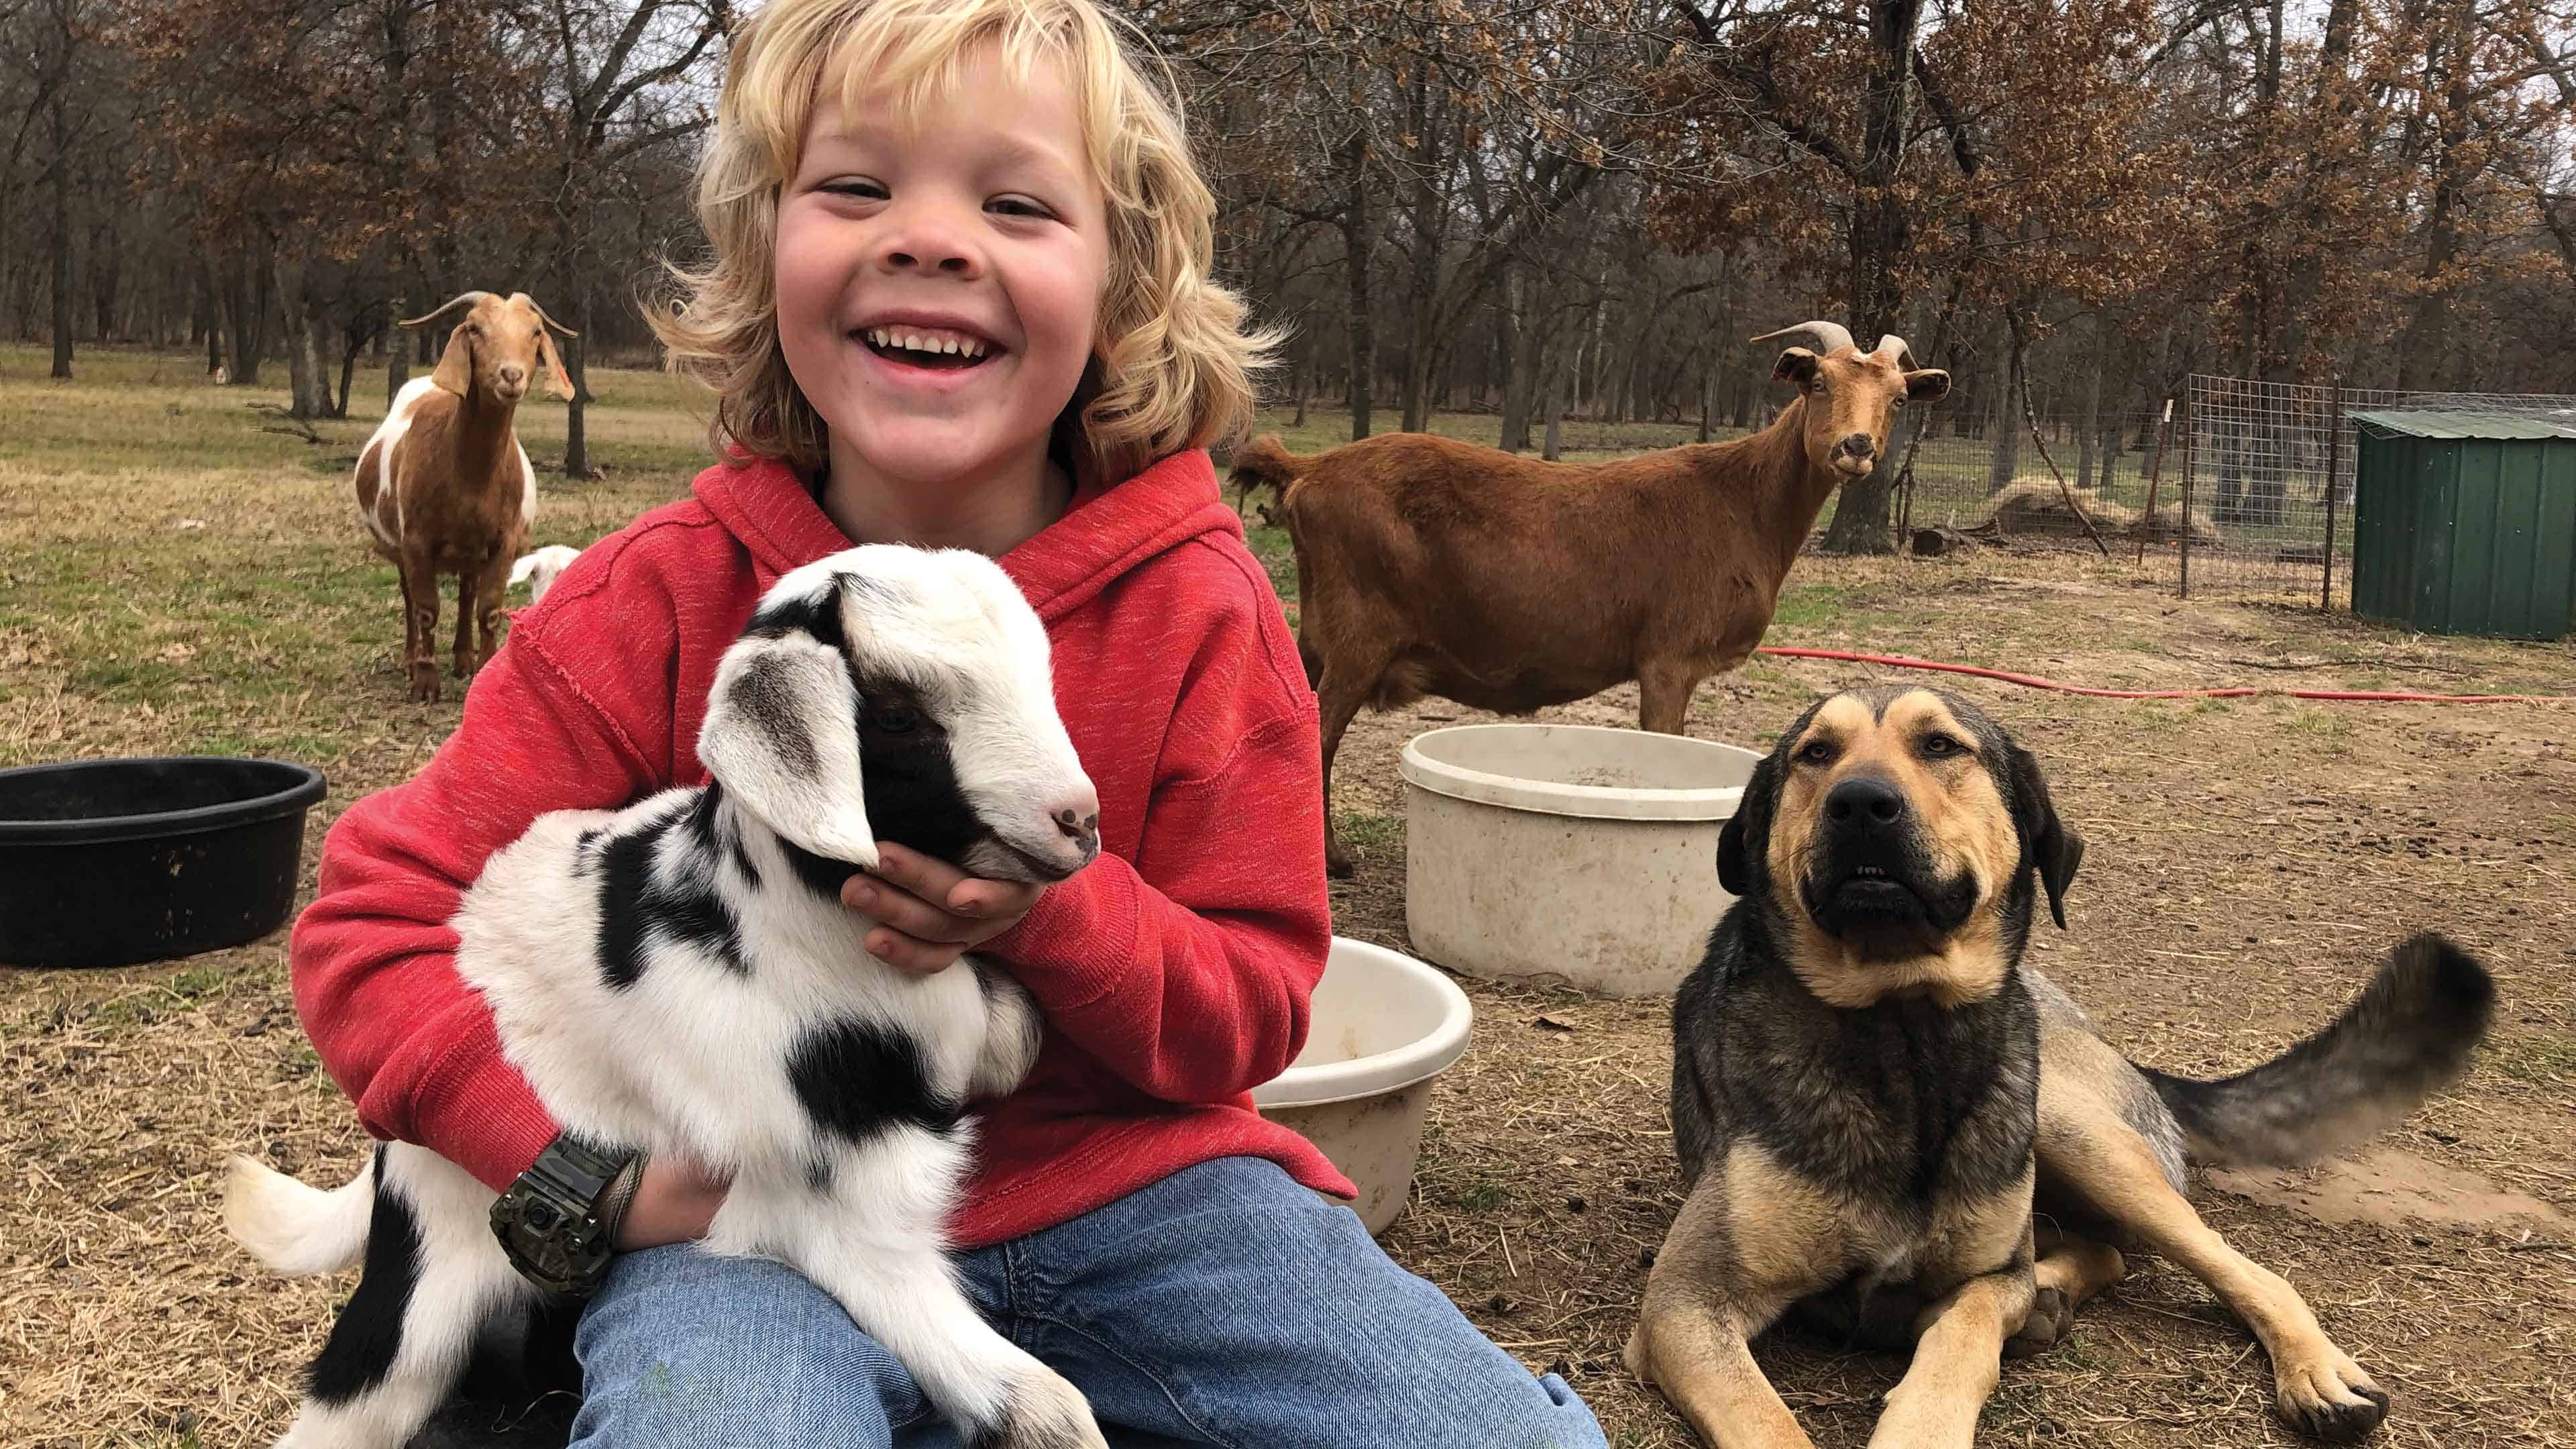 Boy holding baby goat with other farm animals behind him